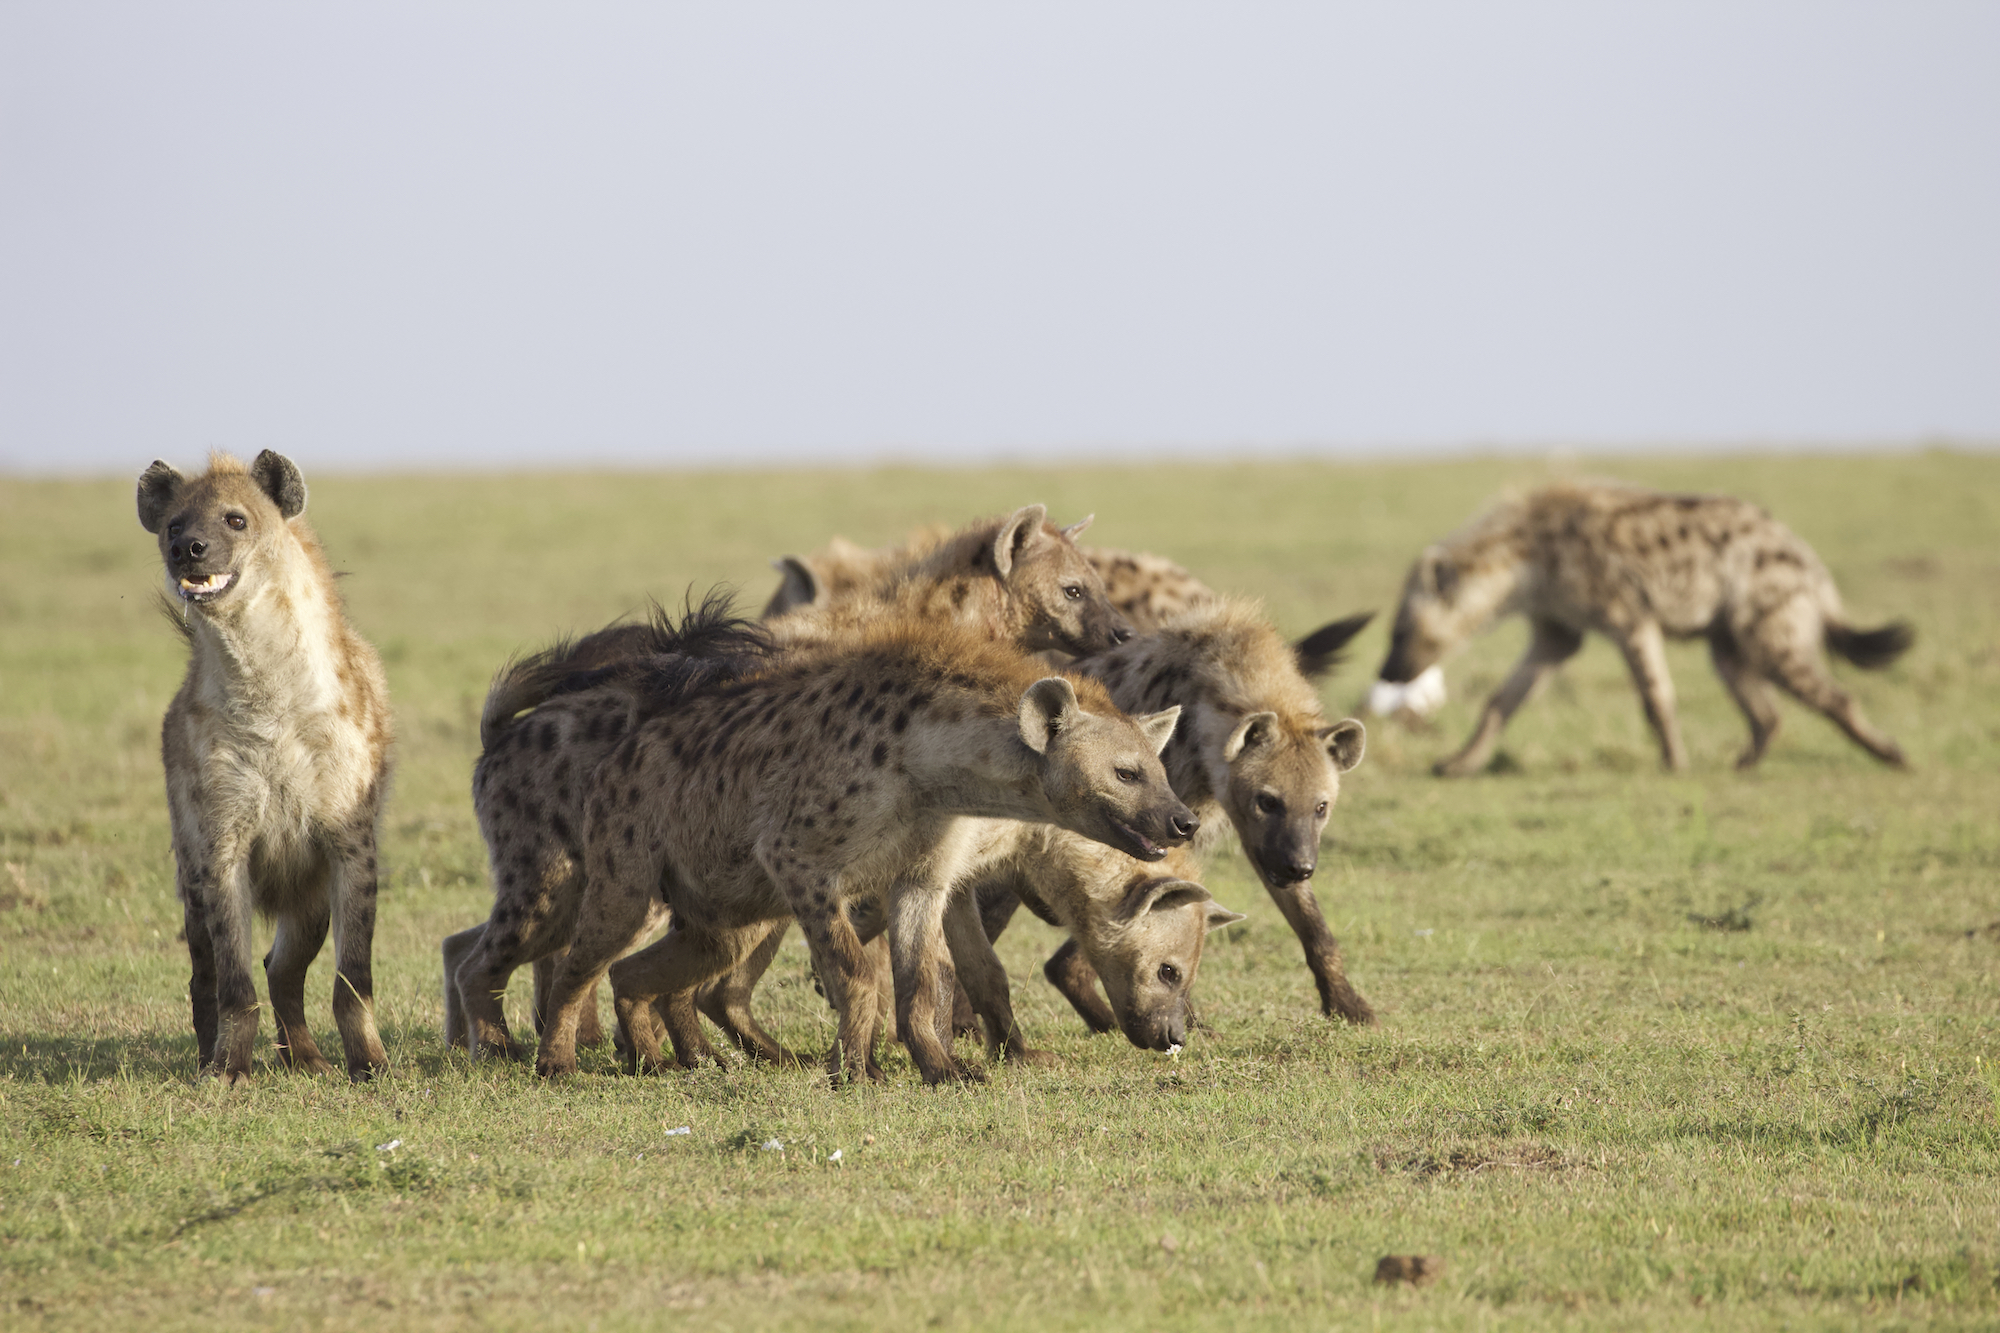 Group of hyenas on the landscape